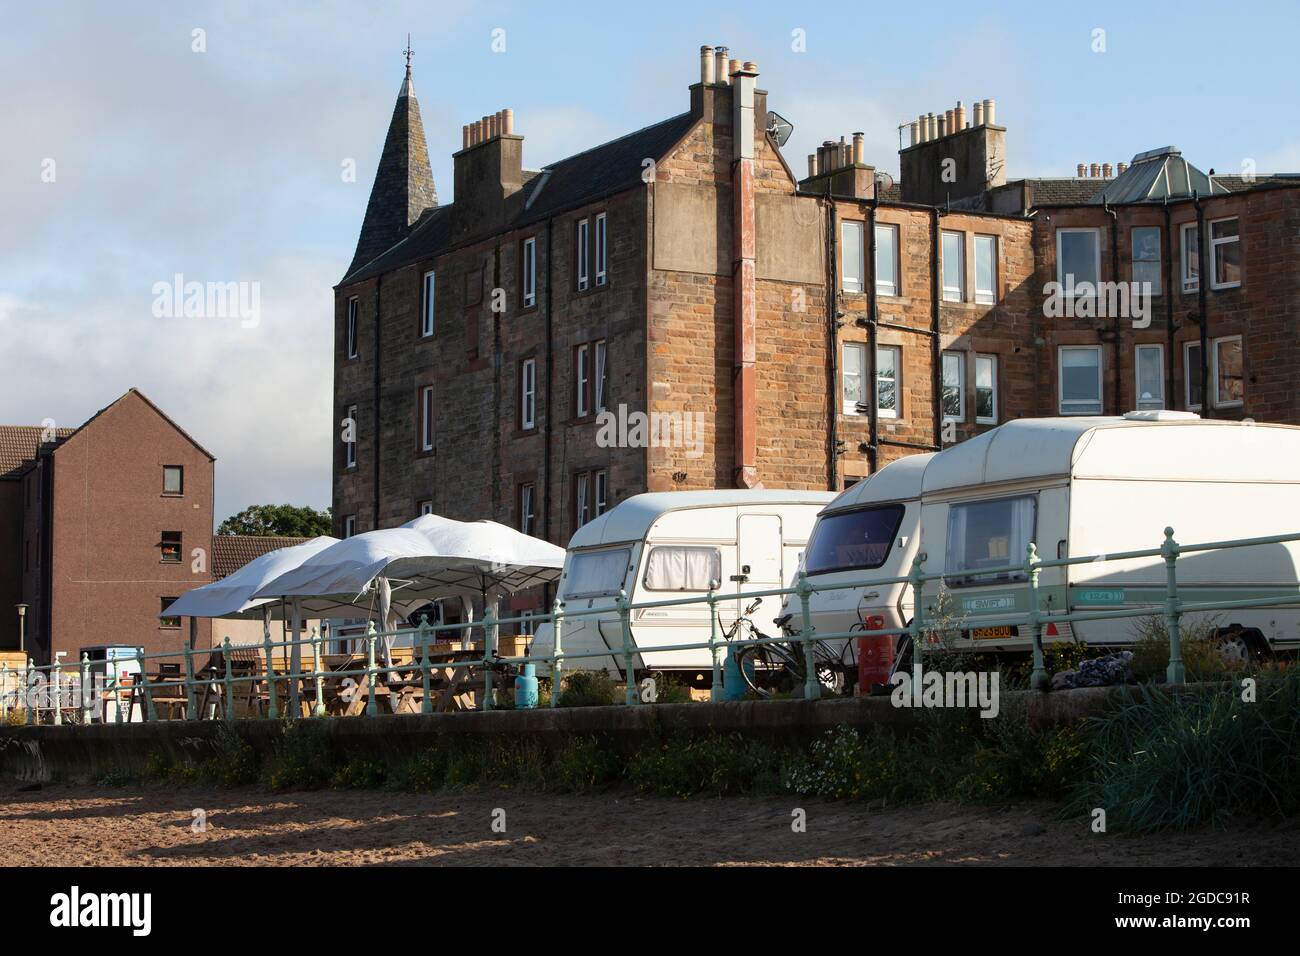 Edinburgh Scotland, UK July 31 2021; General views of caravans parked at King's Place between Portobello and Seafield and next to the sandy beach Stock Photo